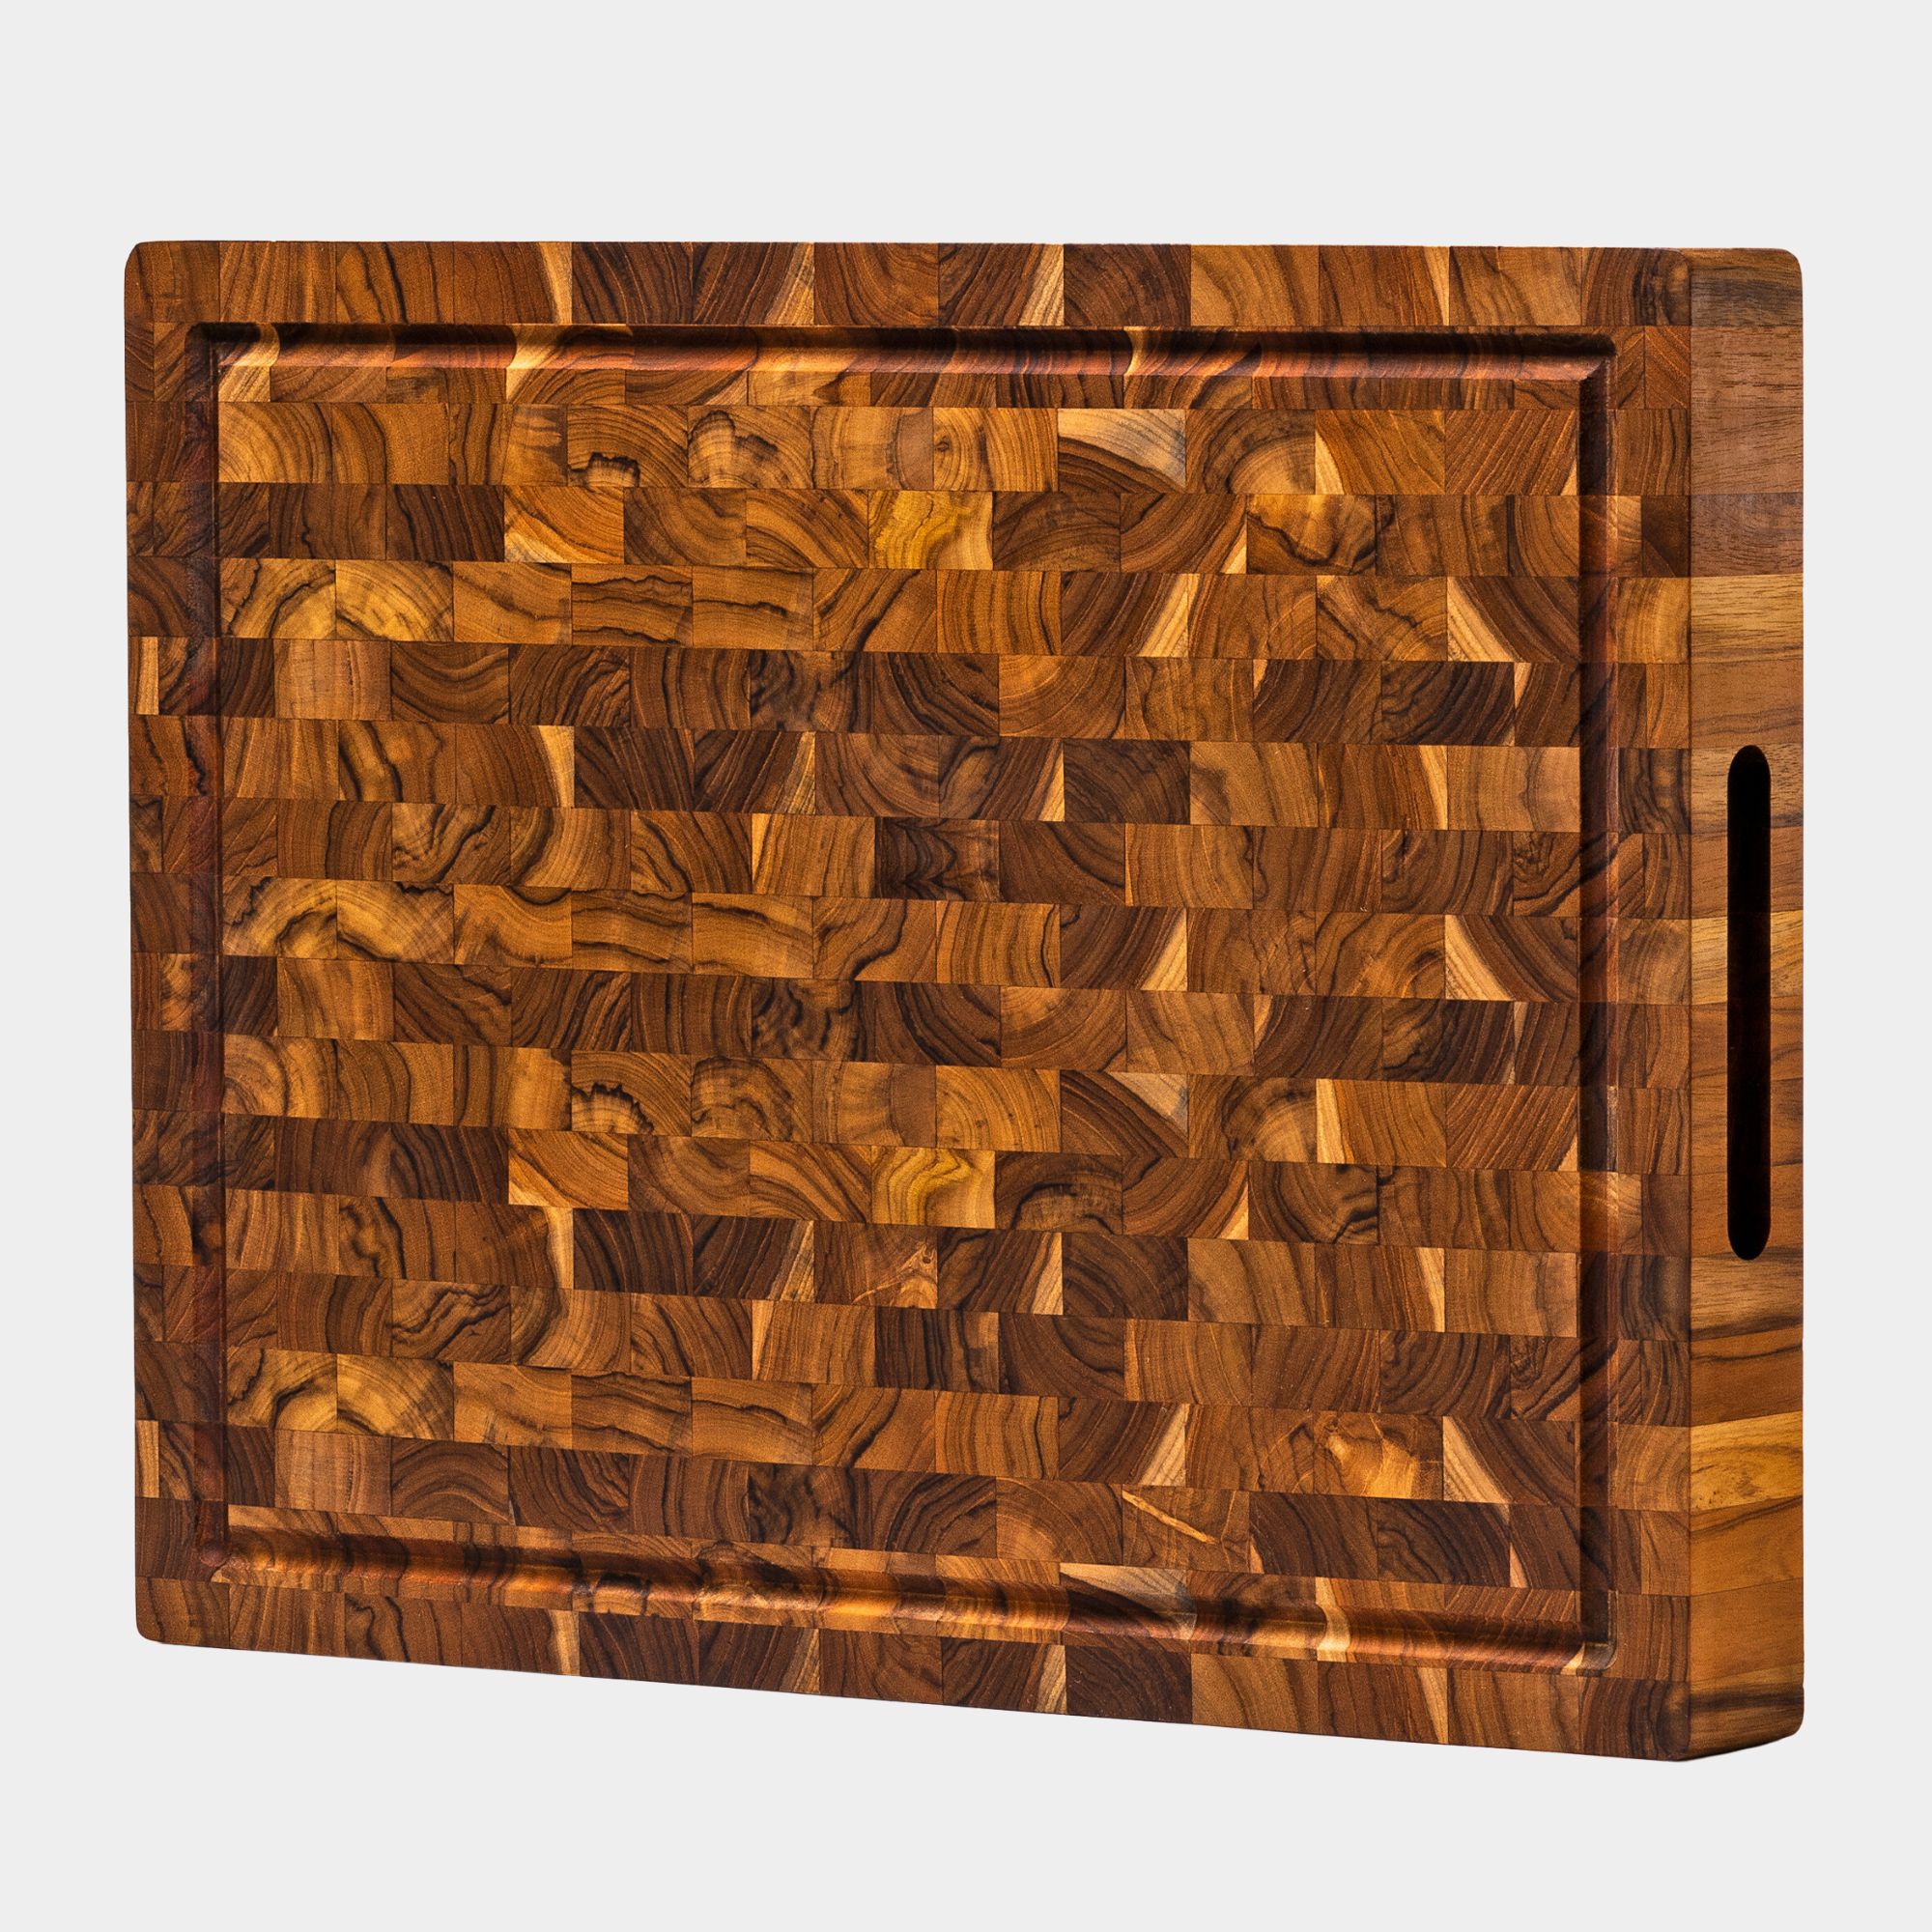 Teak Cutting Board - Rounded Rectangle Chopping